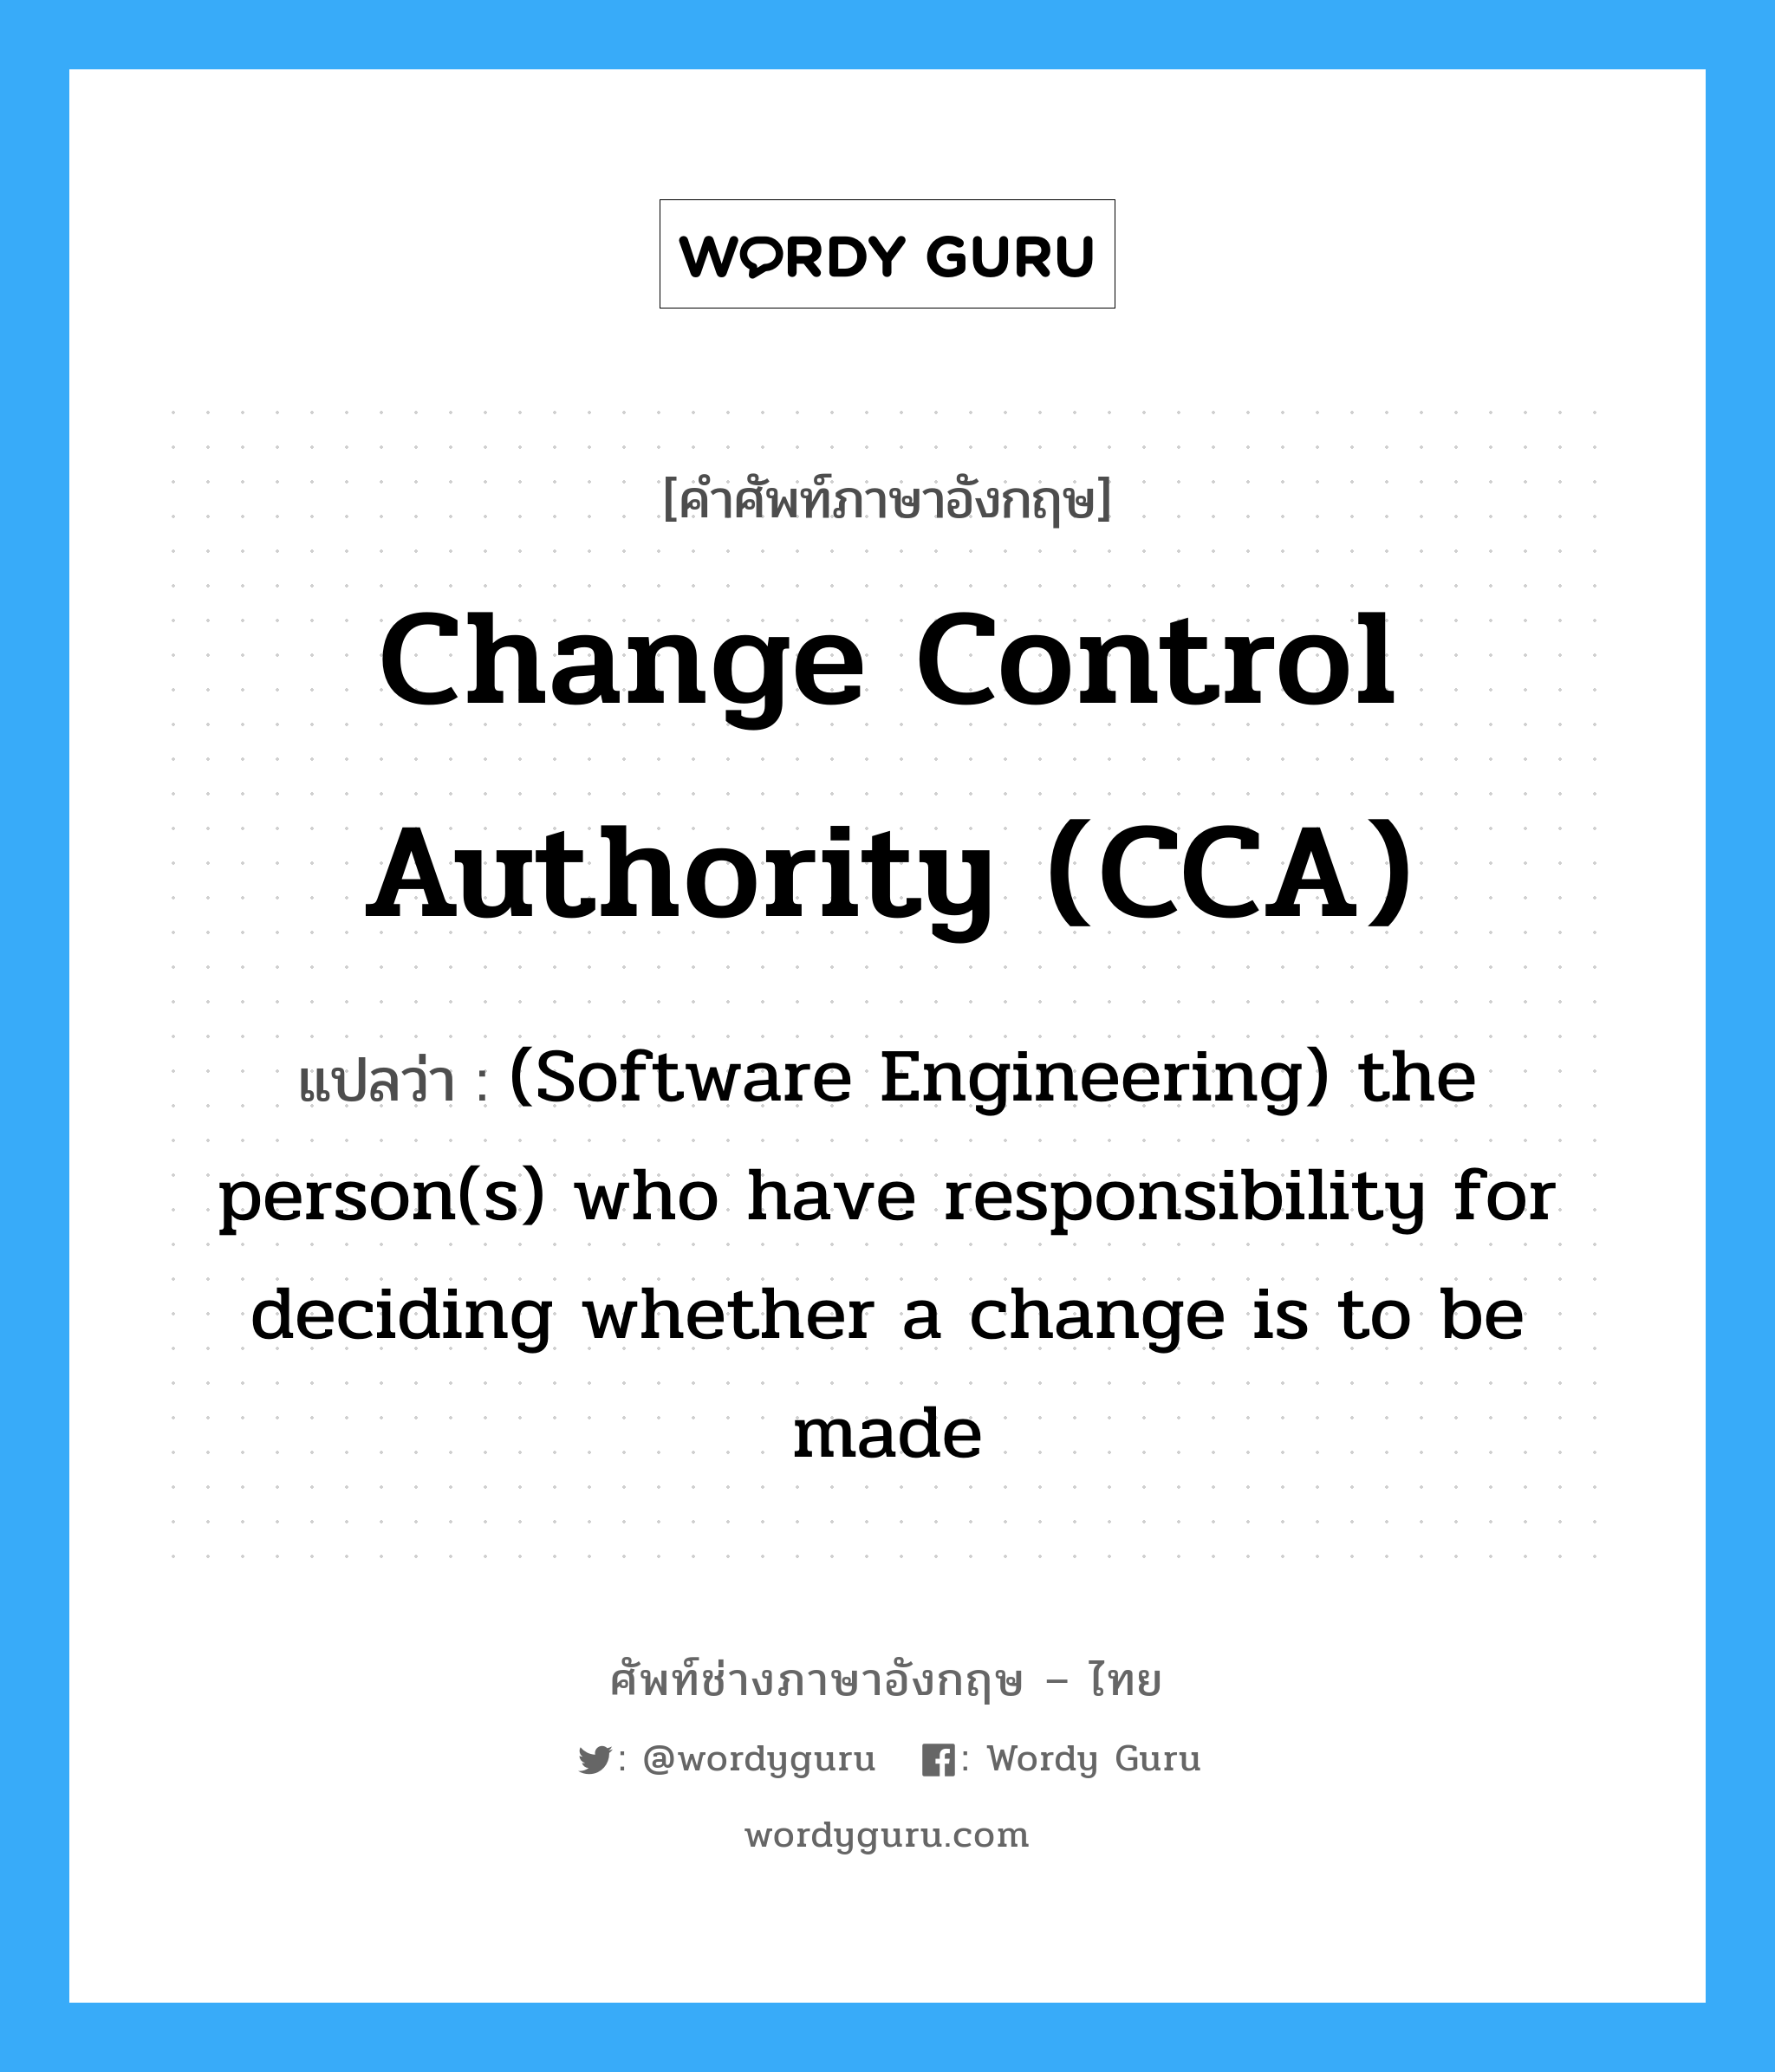 (Software Engineering) the person(s) who have responsibility for deciding whether a change is to be made ภาษาอังกฤษ?, คำศัพท์ช่างภาษาอังกฤษ - ไทย (Software Engineering) the person(s) who have responsibility for deciding whether a change is to be made คำศัพท์ภาษาอังกฤษ (Software Engineering) the person(s) who have responsibility for deciding whether a change is to be made แปลว่า Change control authority (CCA)